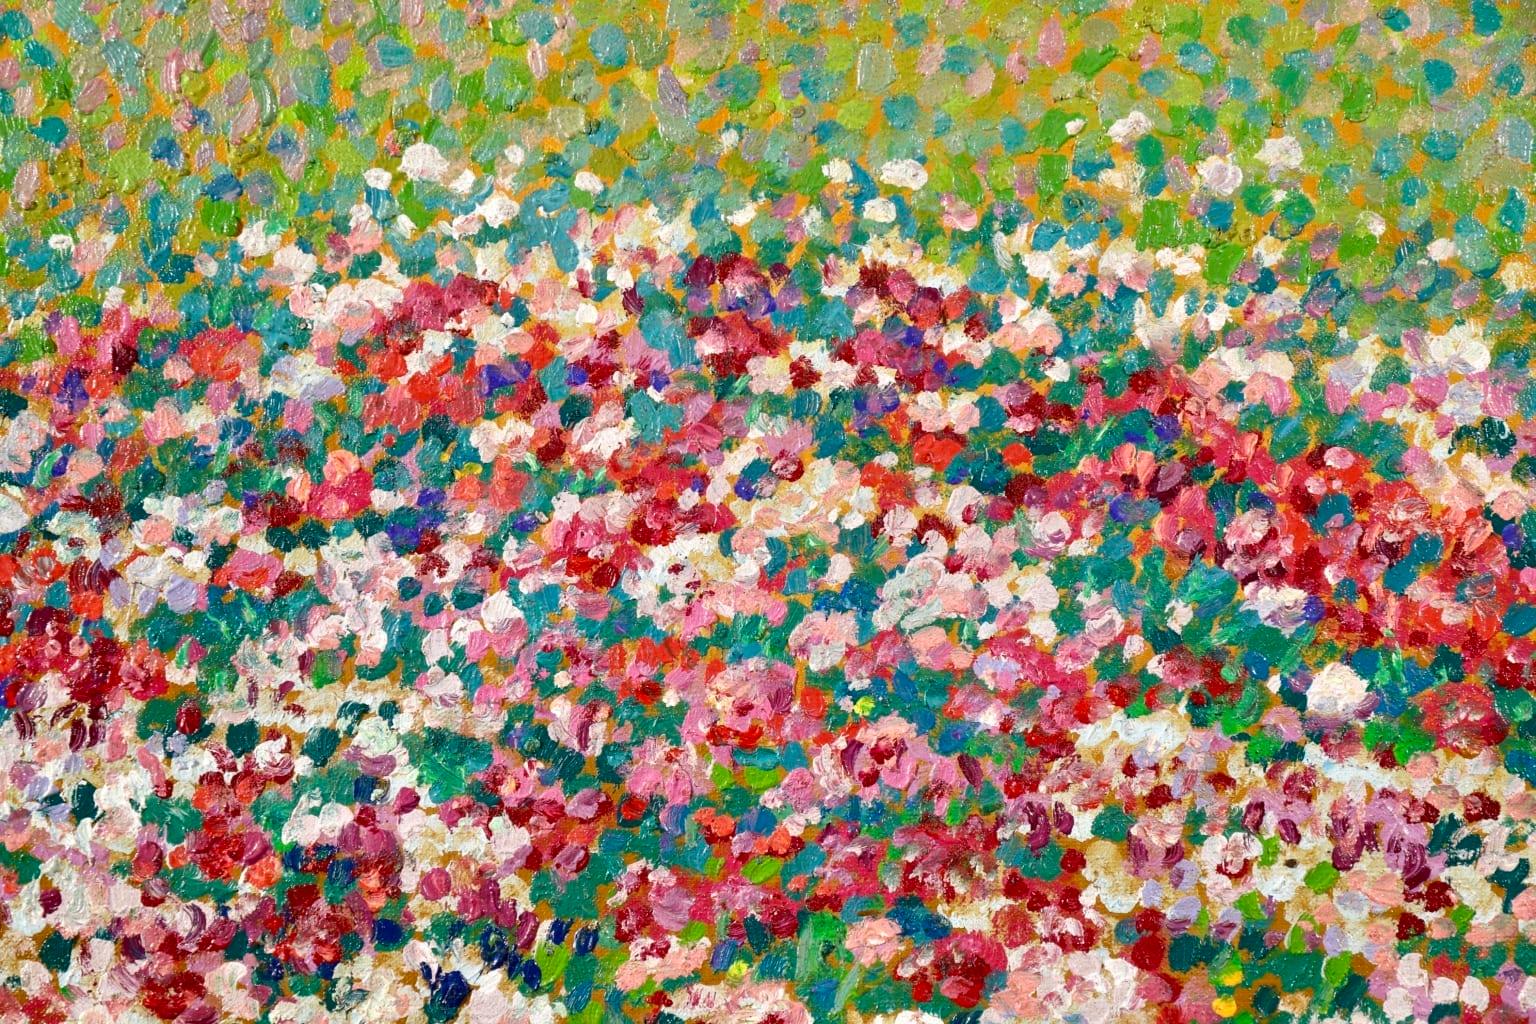 Field of Flowers - Post Impressionist Oil, Landscape Oil by J Martin-Ferrieres 8